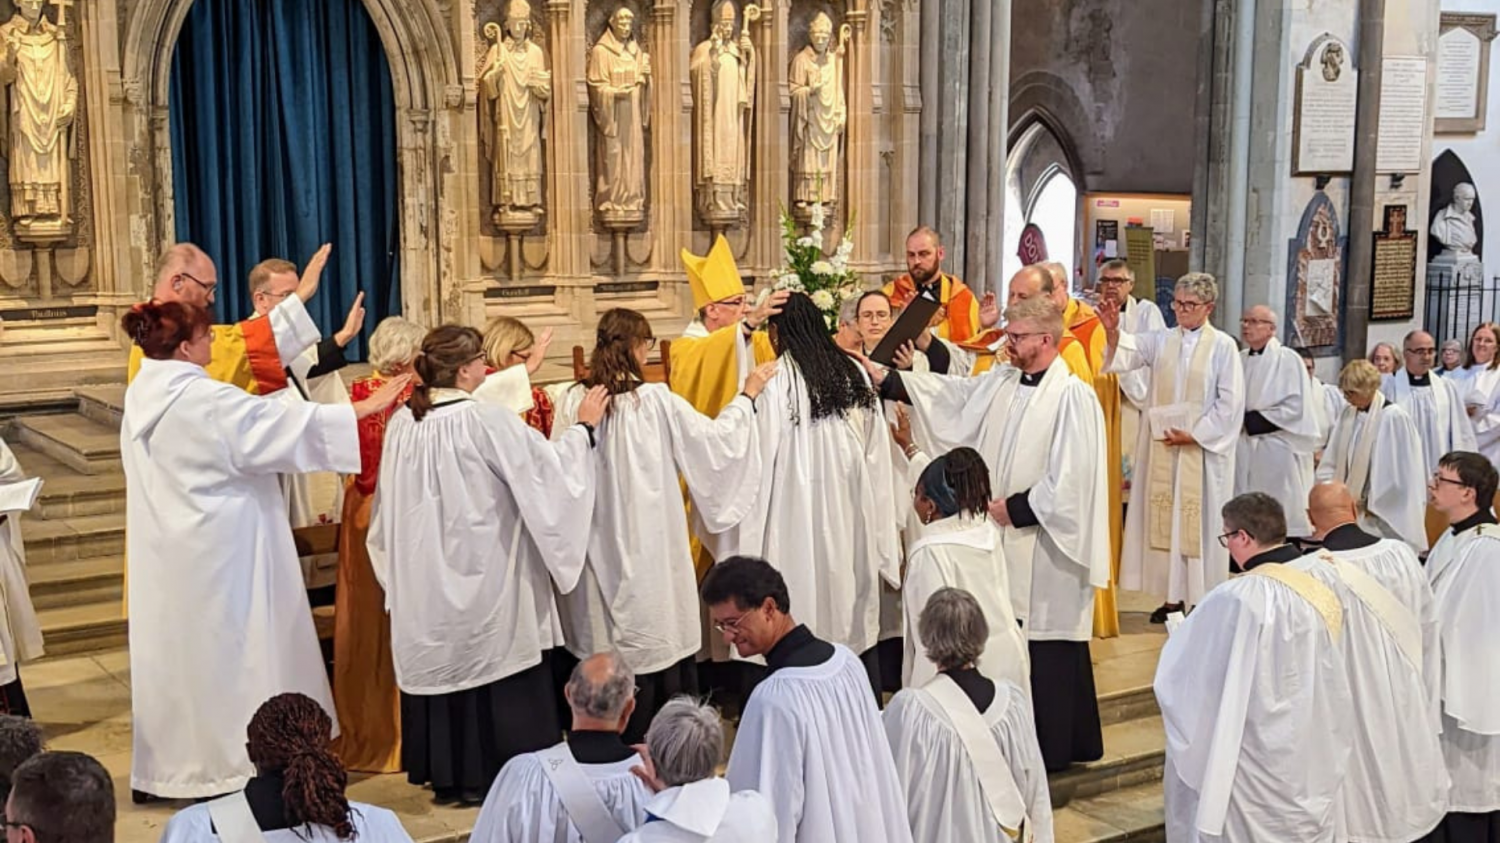 The bishop lays his hands on the head of the ordinand. Other supporting clergy gather around the candidate and raise their hands above the ordinand.